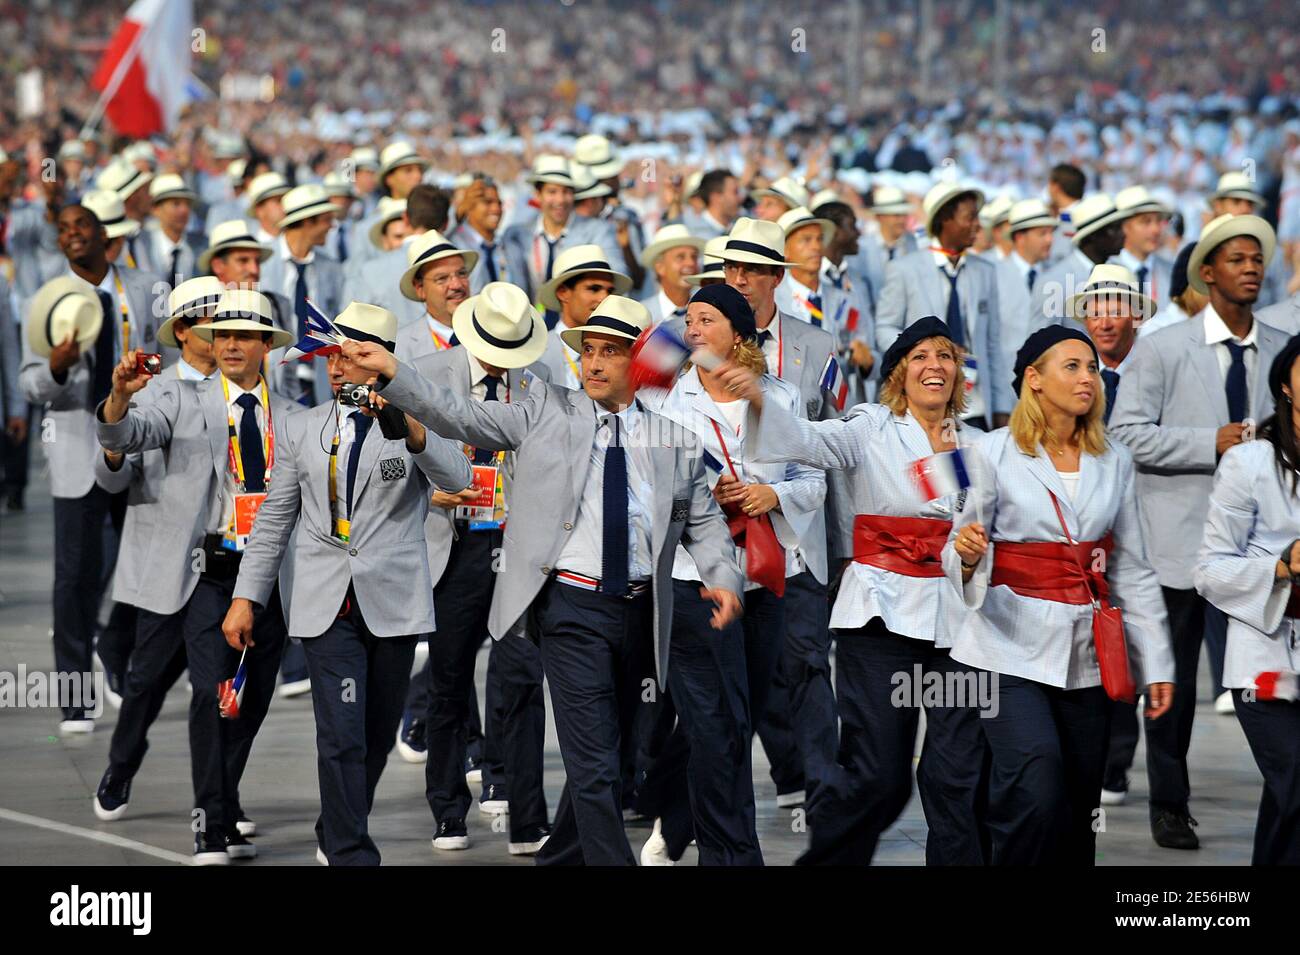 The French delegation during the Opening Ceremony for the 2008 Beijing Summer Olympics at the National Stadium in Beijing, China on August 8, 2008. Photo by Jean-Michel Psaila/ABACAPRESS.COM Stock Photo